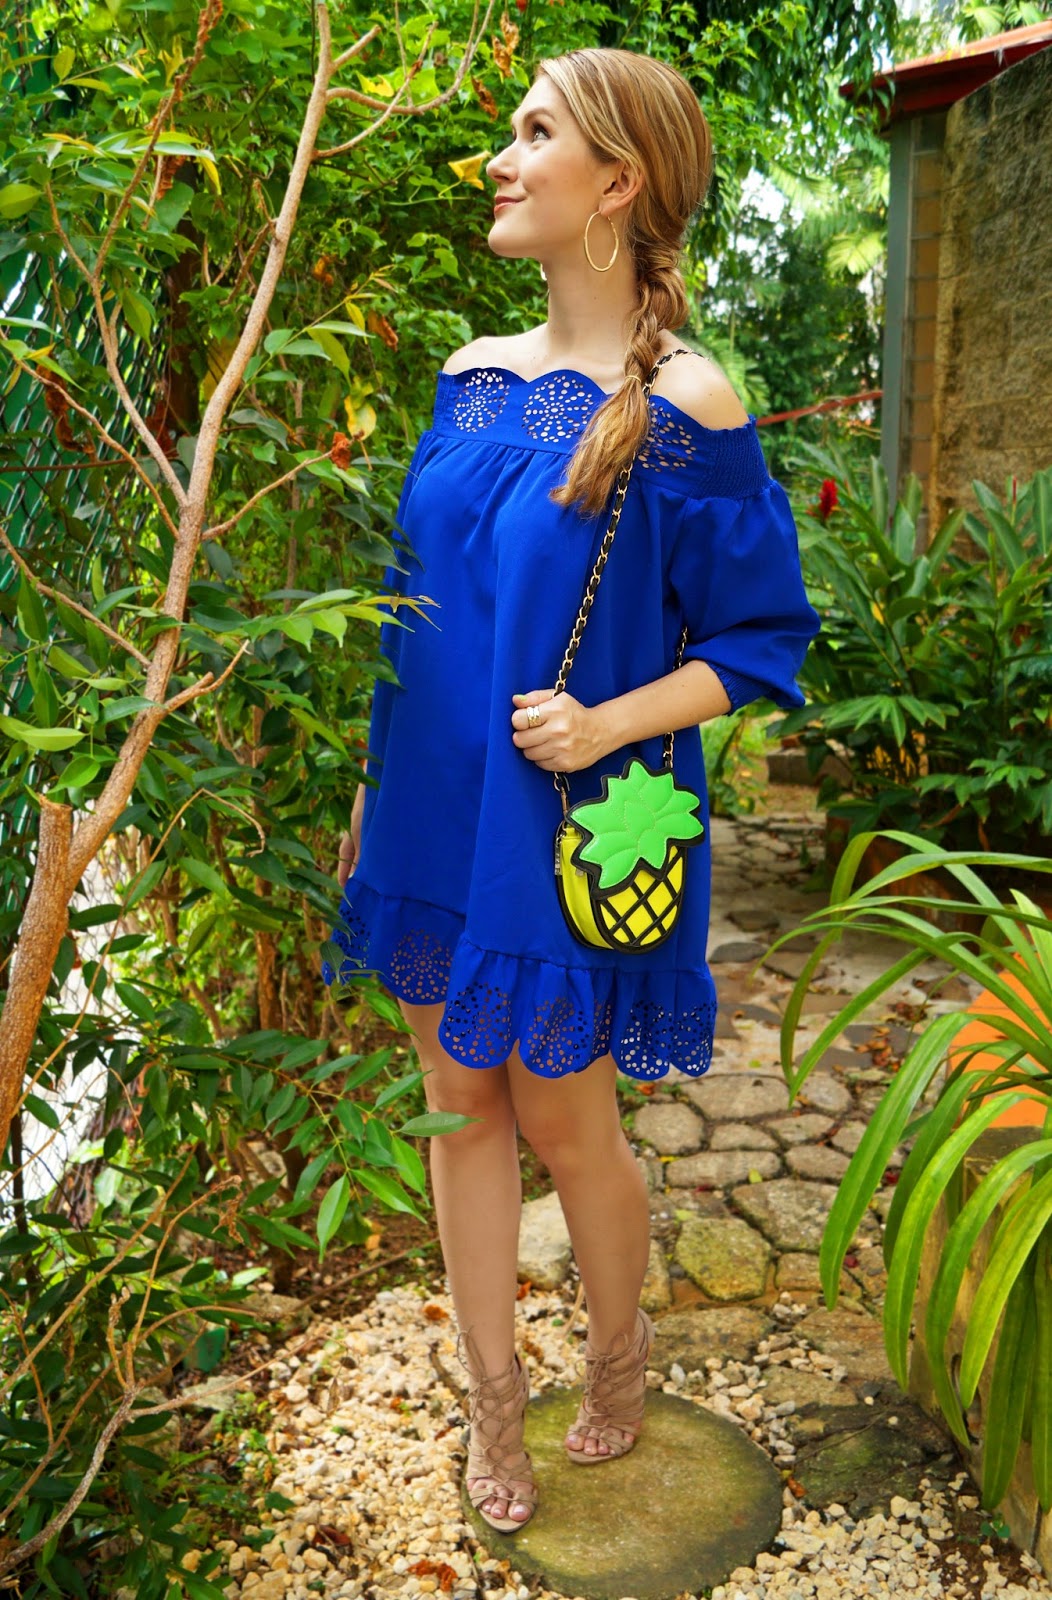 Colorful Summer Outfit. Love the Pineapple bag!